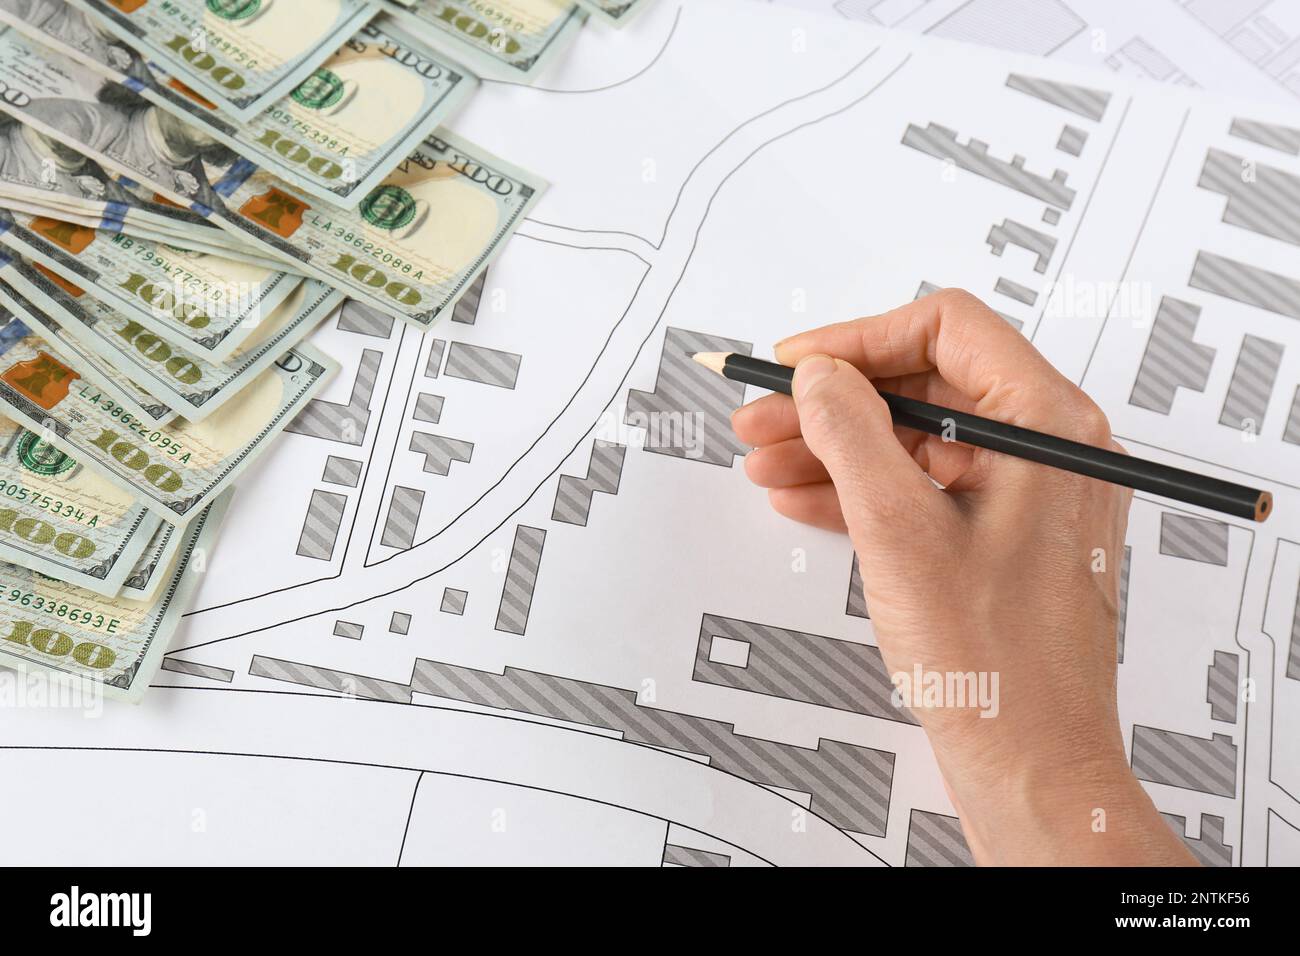 Cartographer with money drawing cadastral map, closeup Stock Photo